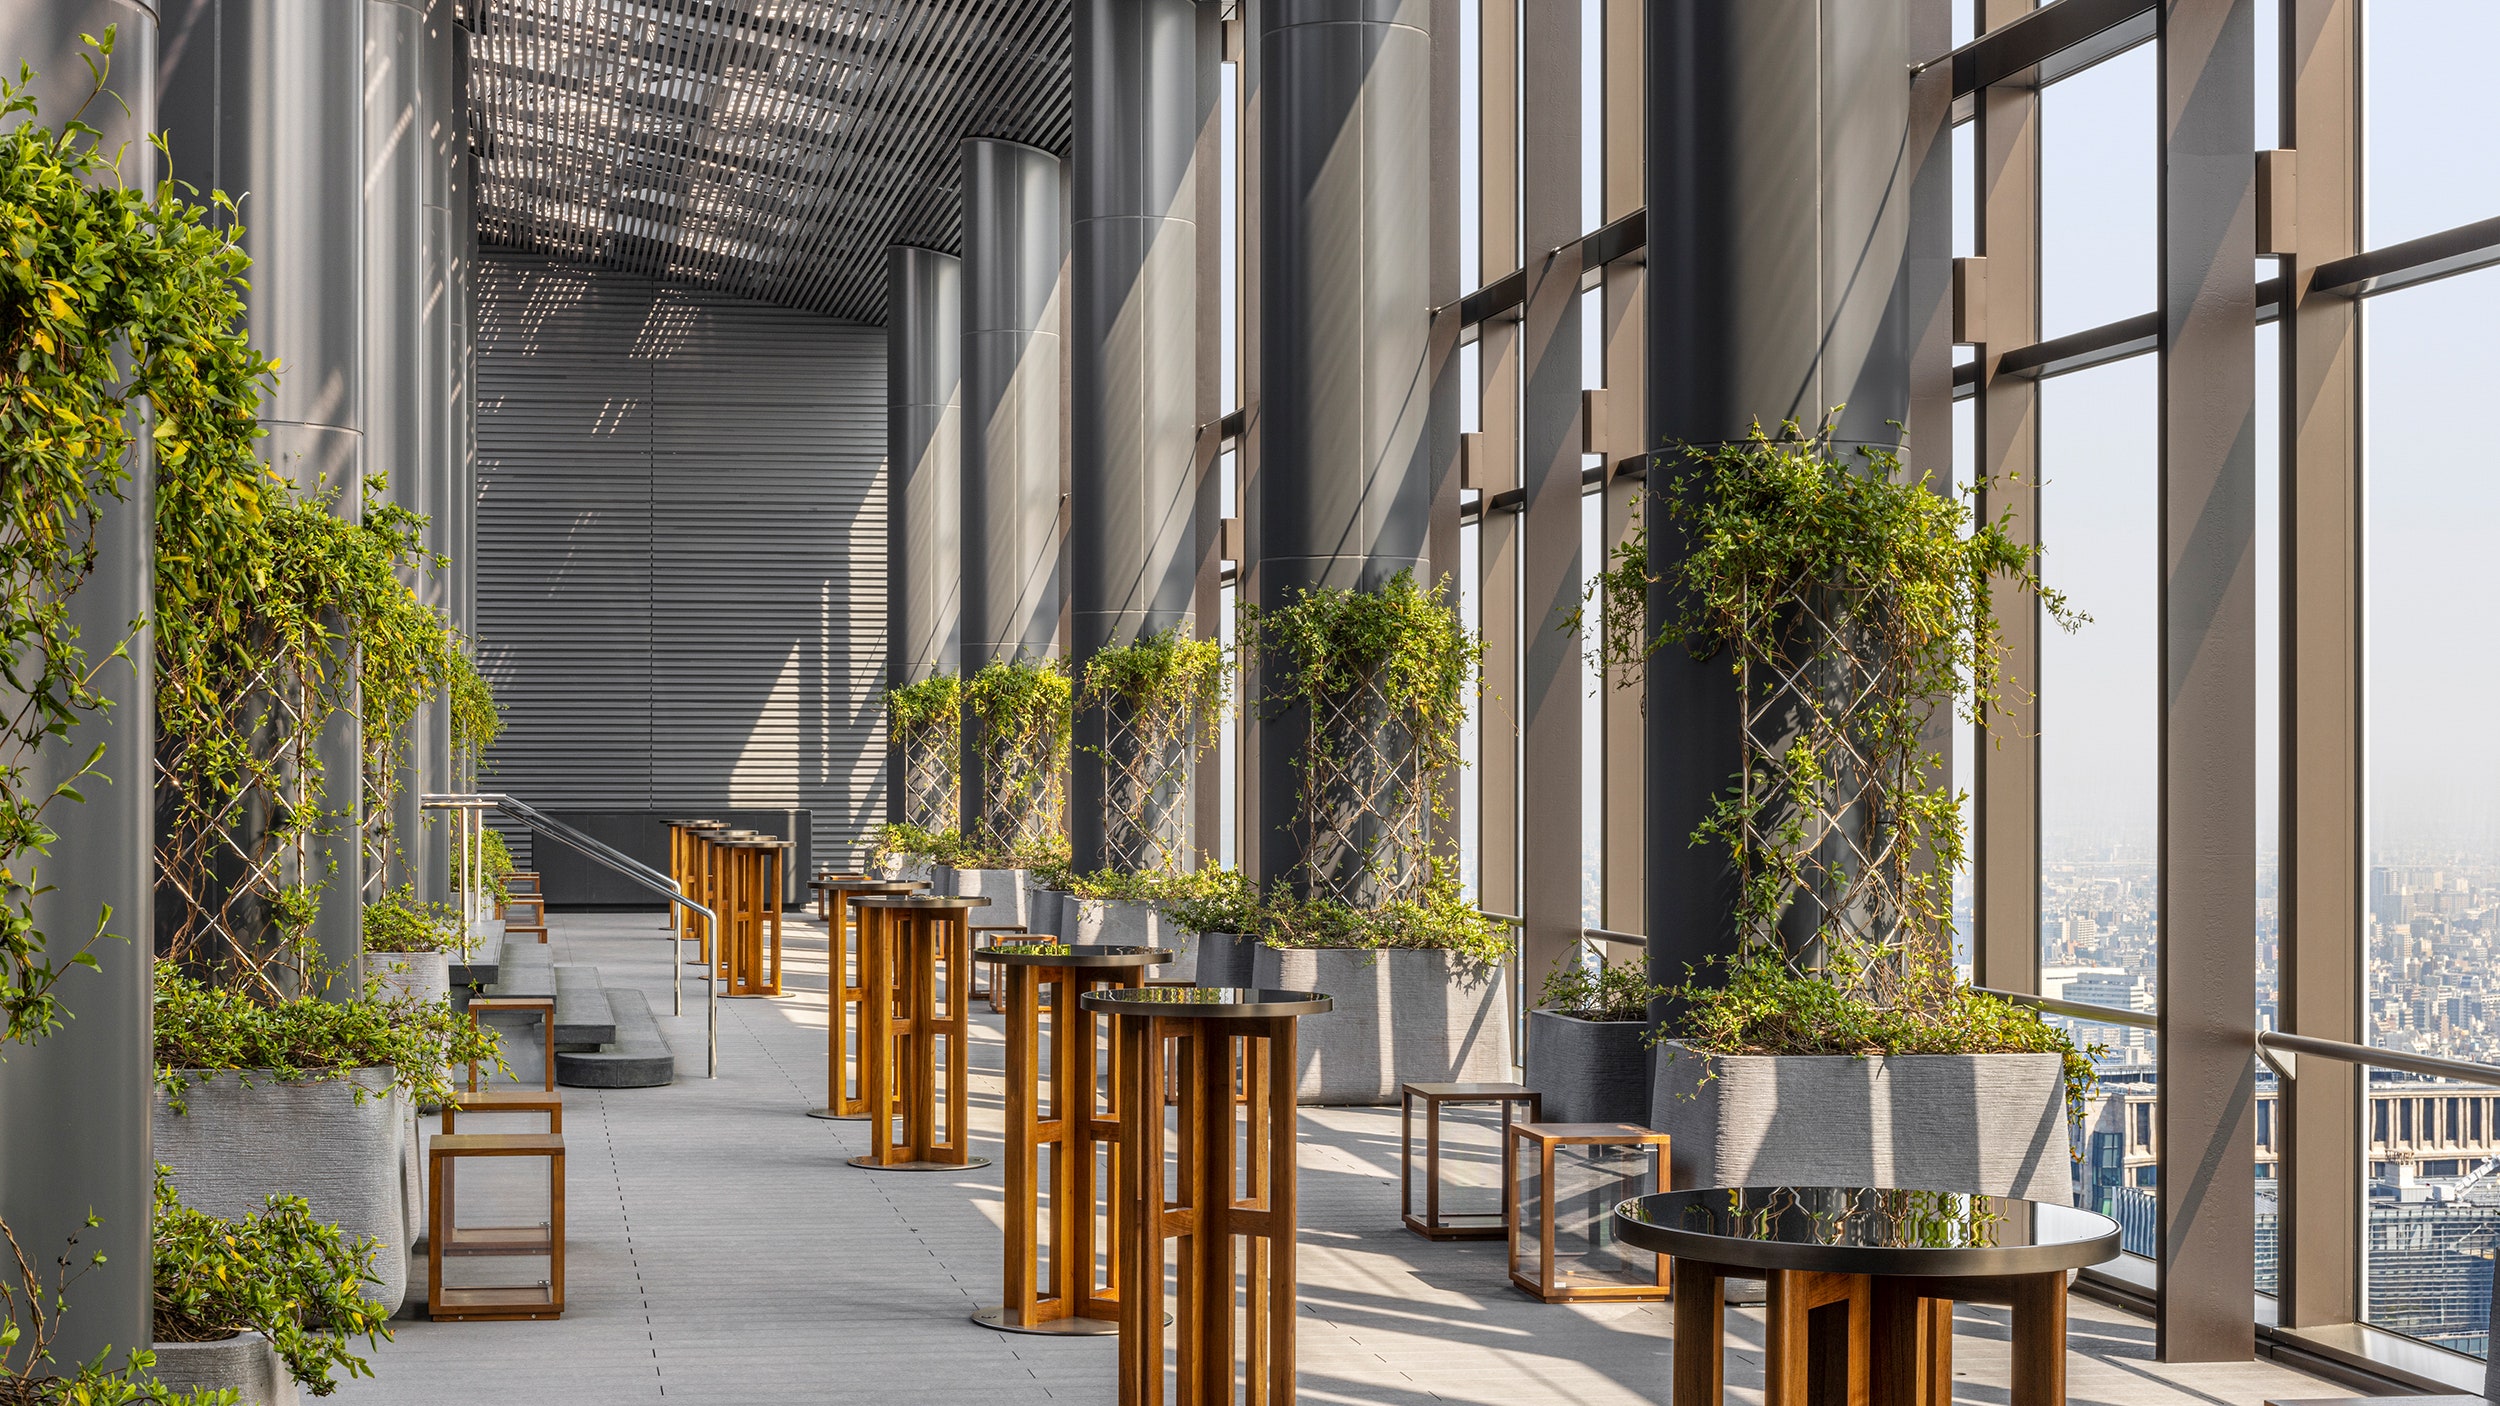 <p><strong>Top amenities:</strong> Michelin-starred restaurant, multiple terraces, swanky rooftop bar<br> <strong>What’s nearby:</strong> Luxury shopping district, Ginza</p> <p>The newest luxury boutique on the block, Bulgari Hotel Tokyo opened in April 2023. Located in the central Yaesu neighborhood, between luxury shopping district Ginza and the Nihombashi business district, the hotel features 98 suites with ceilings that are hand-painted with five layers of gold paint and ​​signature black Bulgari granite in various spaces—a nod to the brand’s Italian luxury aesthetic. Japanese craftsmanship also shines with soft gold bedspread fabric from Kyoto textile maker Hosoo and black granite bathtubs found in each room. At the rooftop Bulgari Bar, Japanese yuzu and Italian lemon trees line the space that offers incredible views of the city—including Mount Fuji.</p><p>Sign up to receive the latest news, expert tips, and inspiration on all things travel.</p><a href="https://www.cntraveler.com/newsletter/the-daily?sourceCode=msnsend">Inspire Me</a>